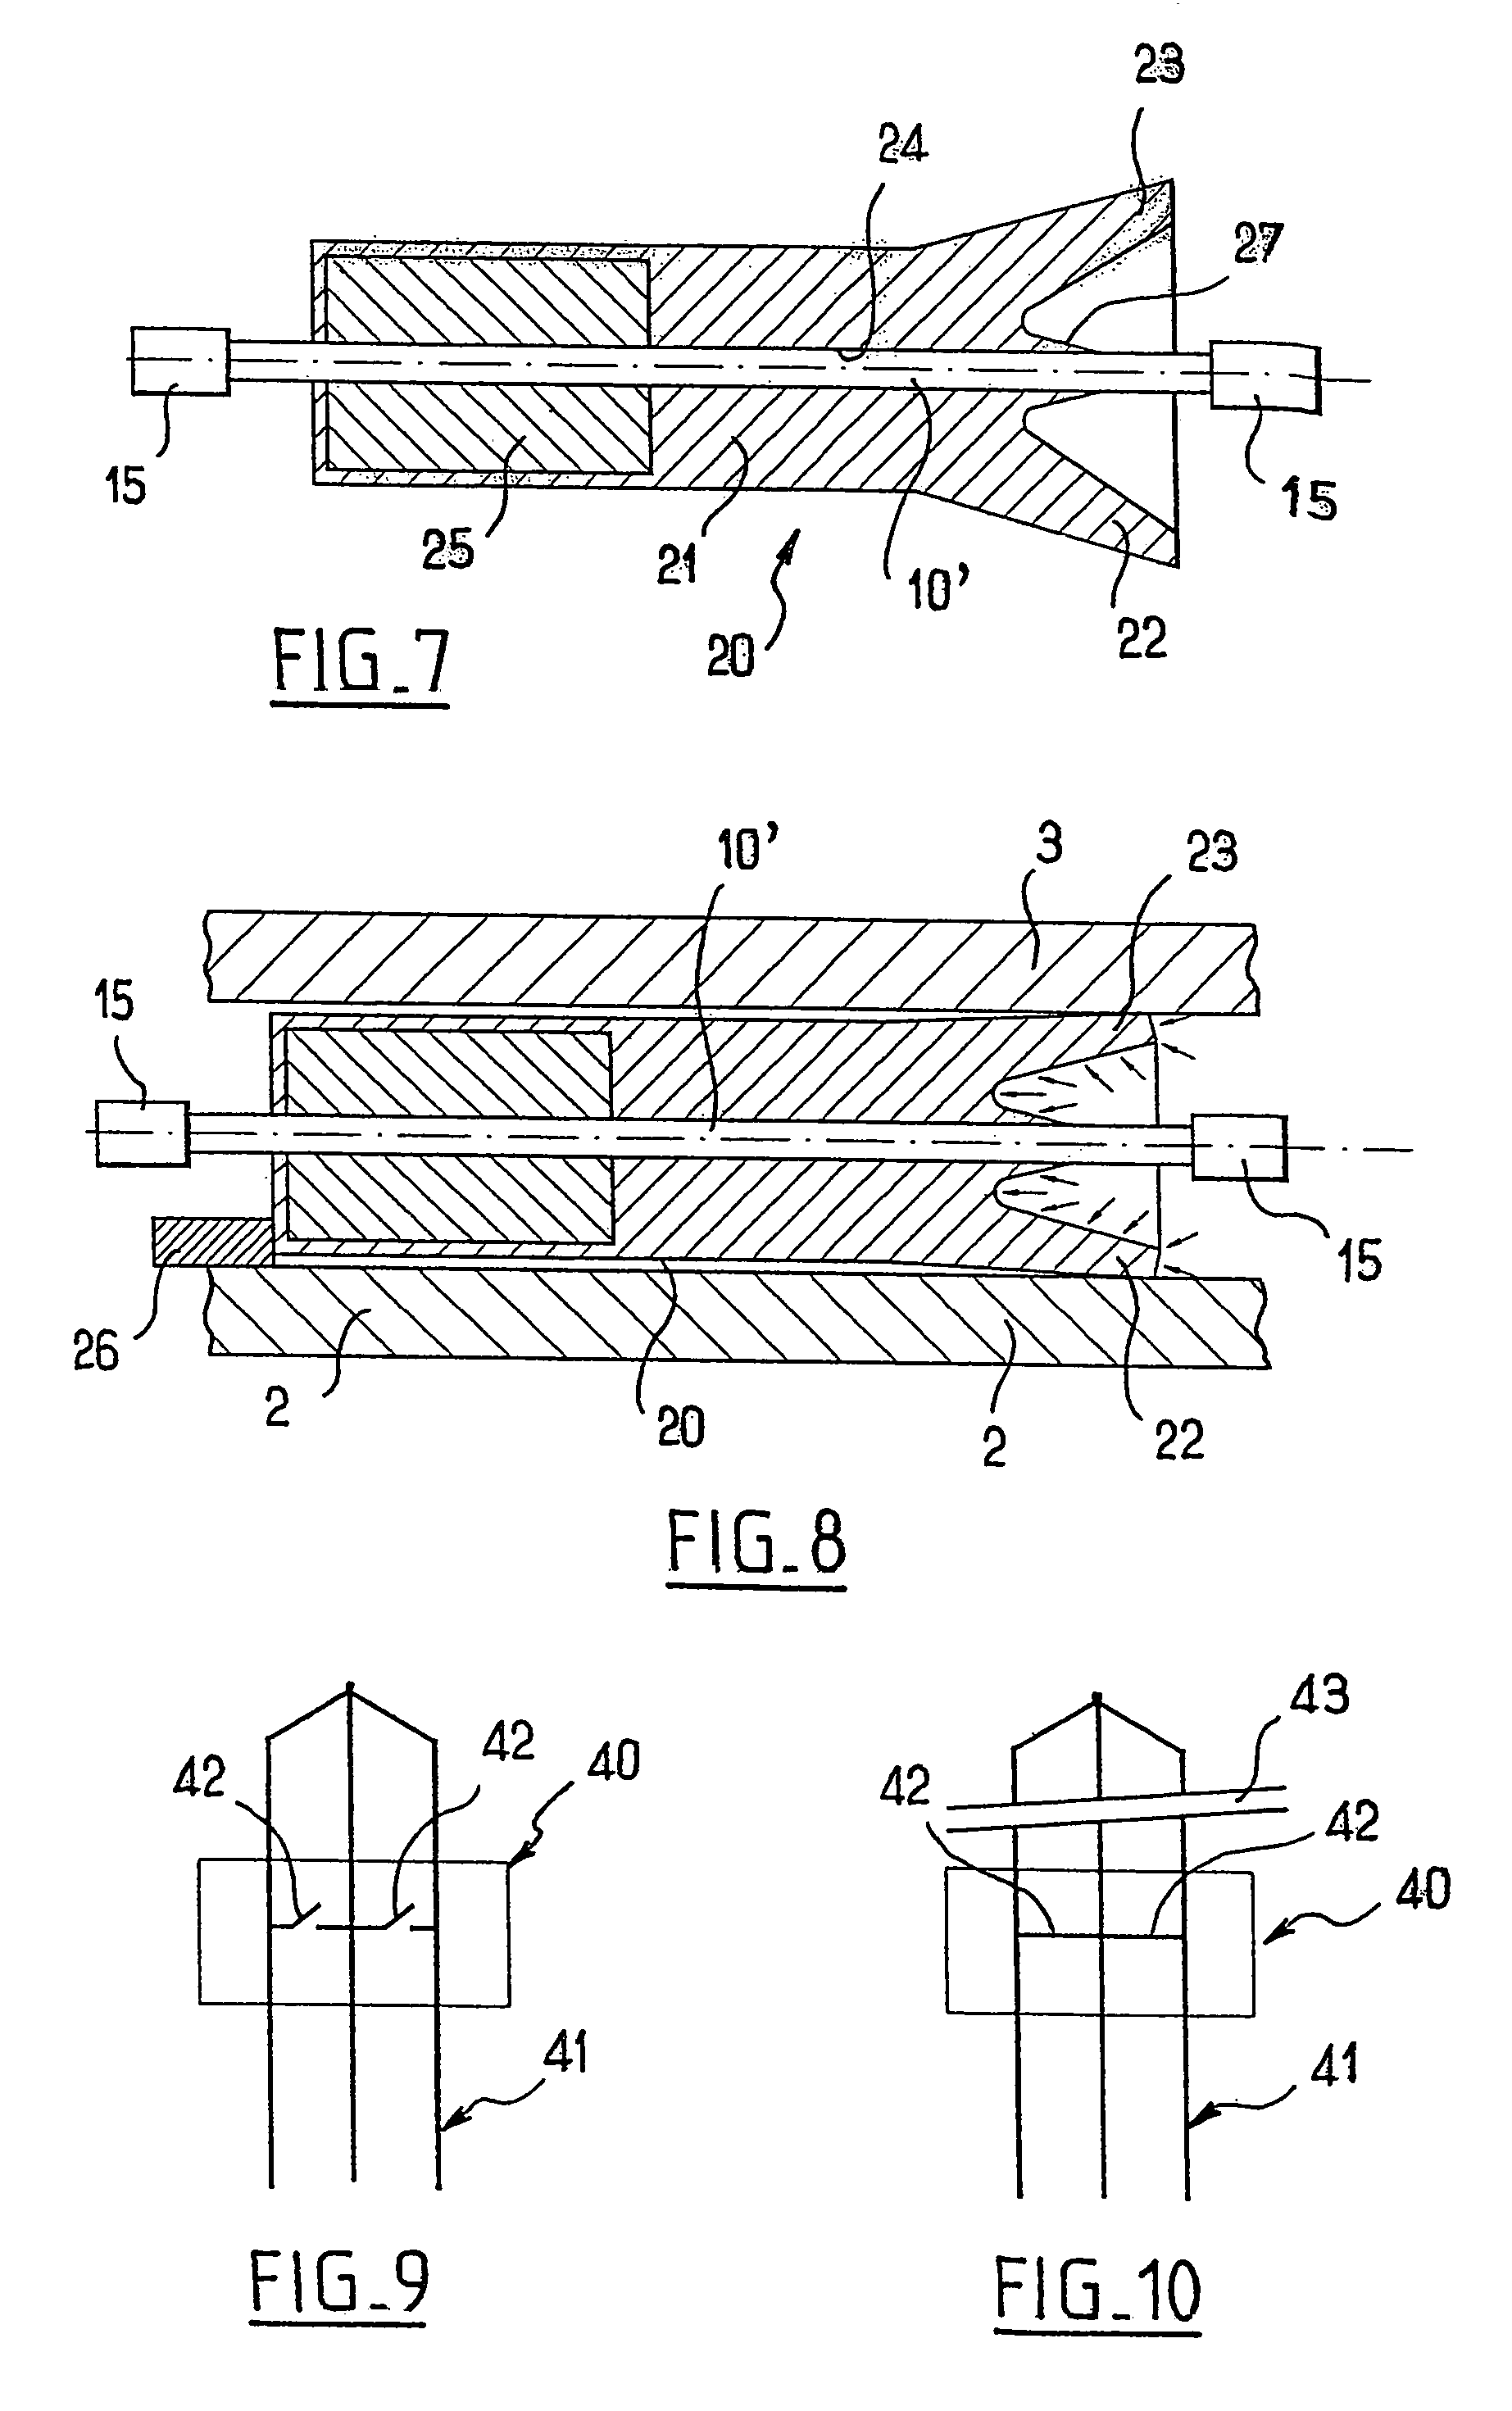 Heated windable rigid duct for transporting fluids, particularly hydrocarbons